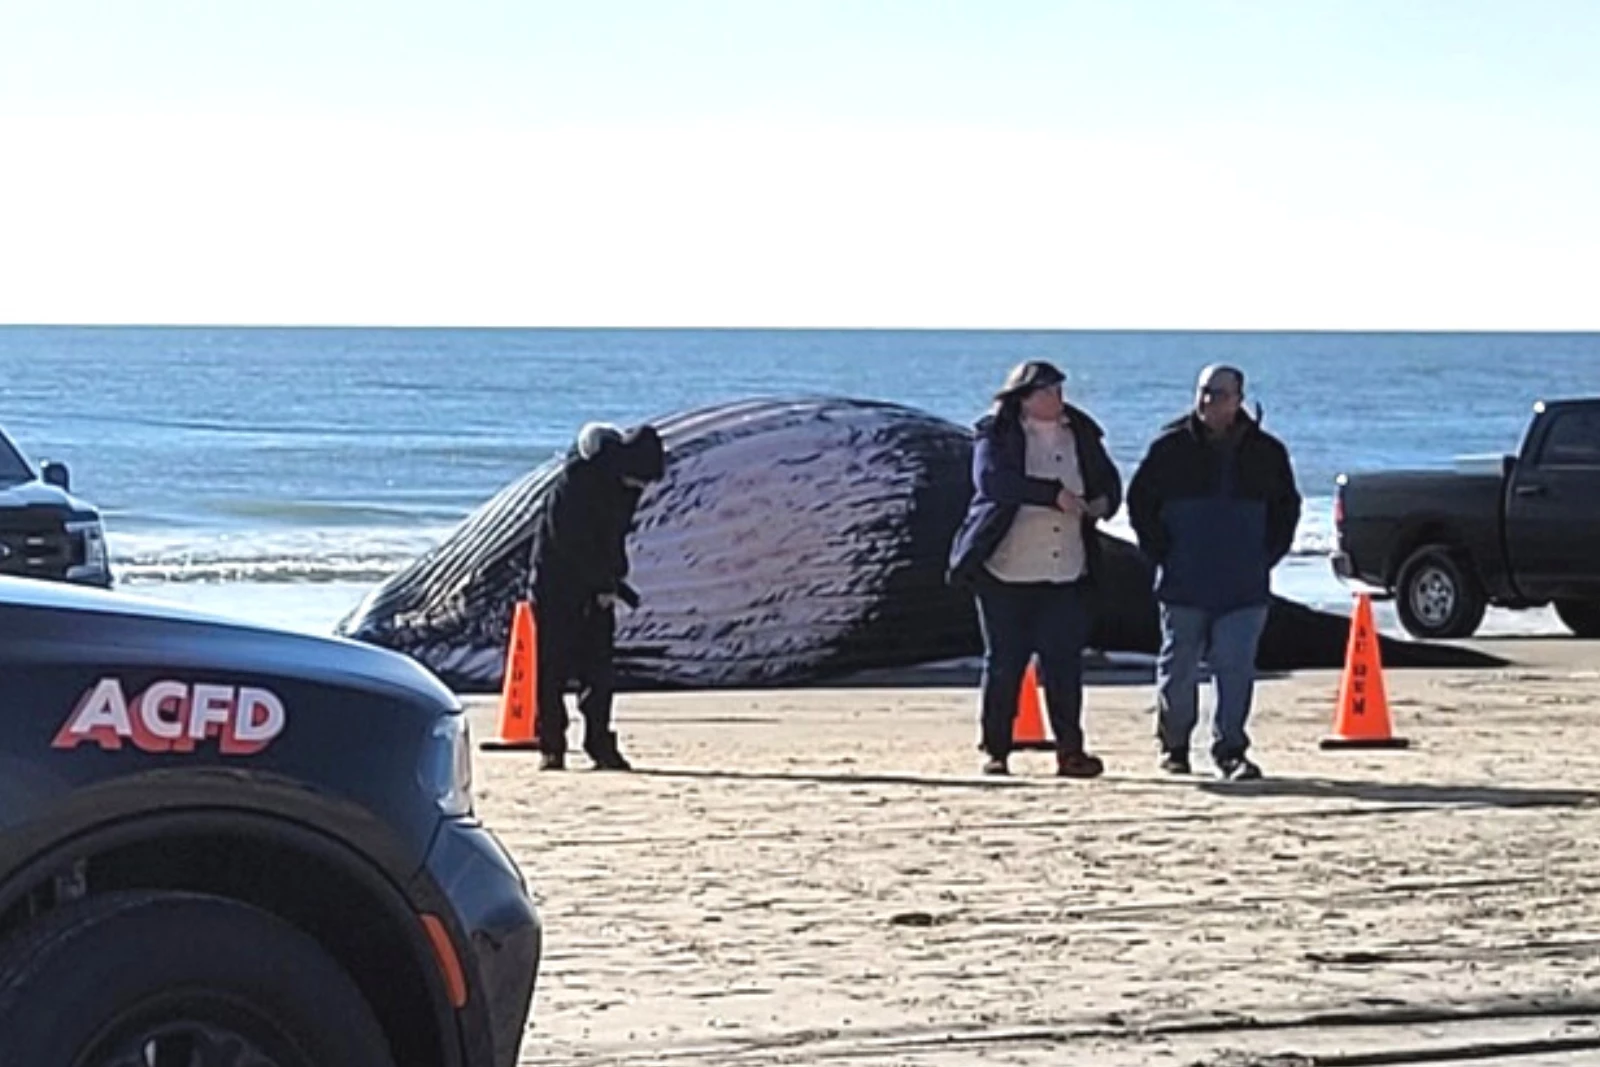 The many mysteries that have washed up on NJ beaches